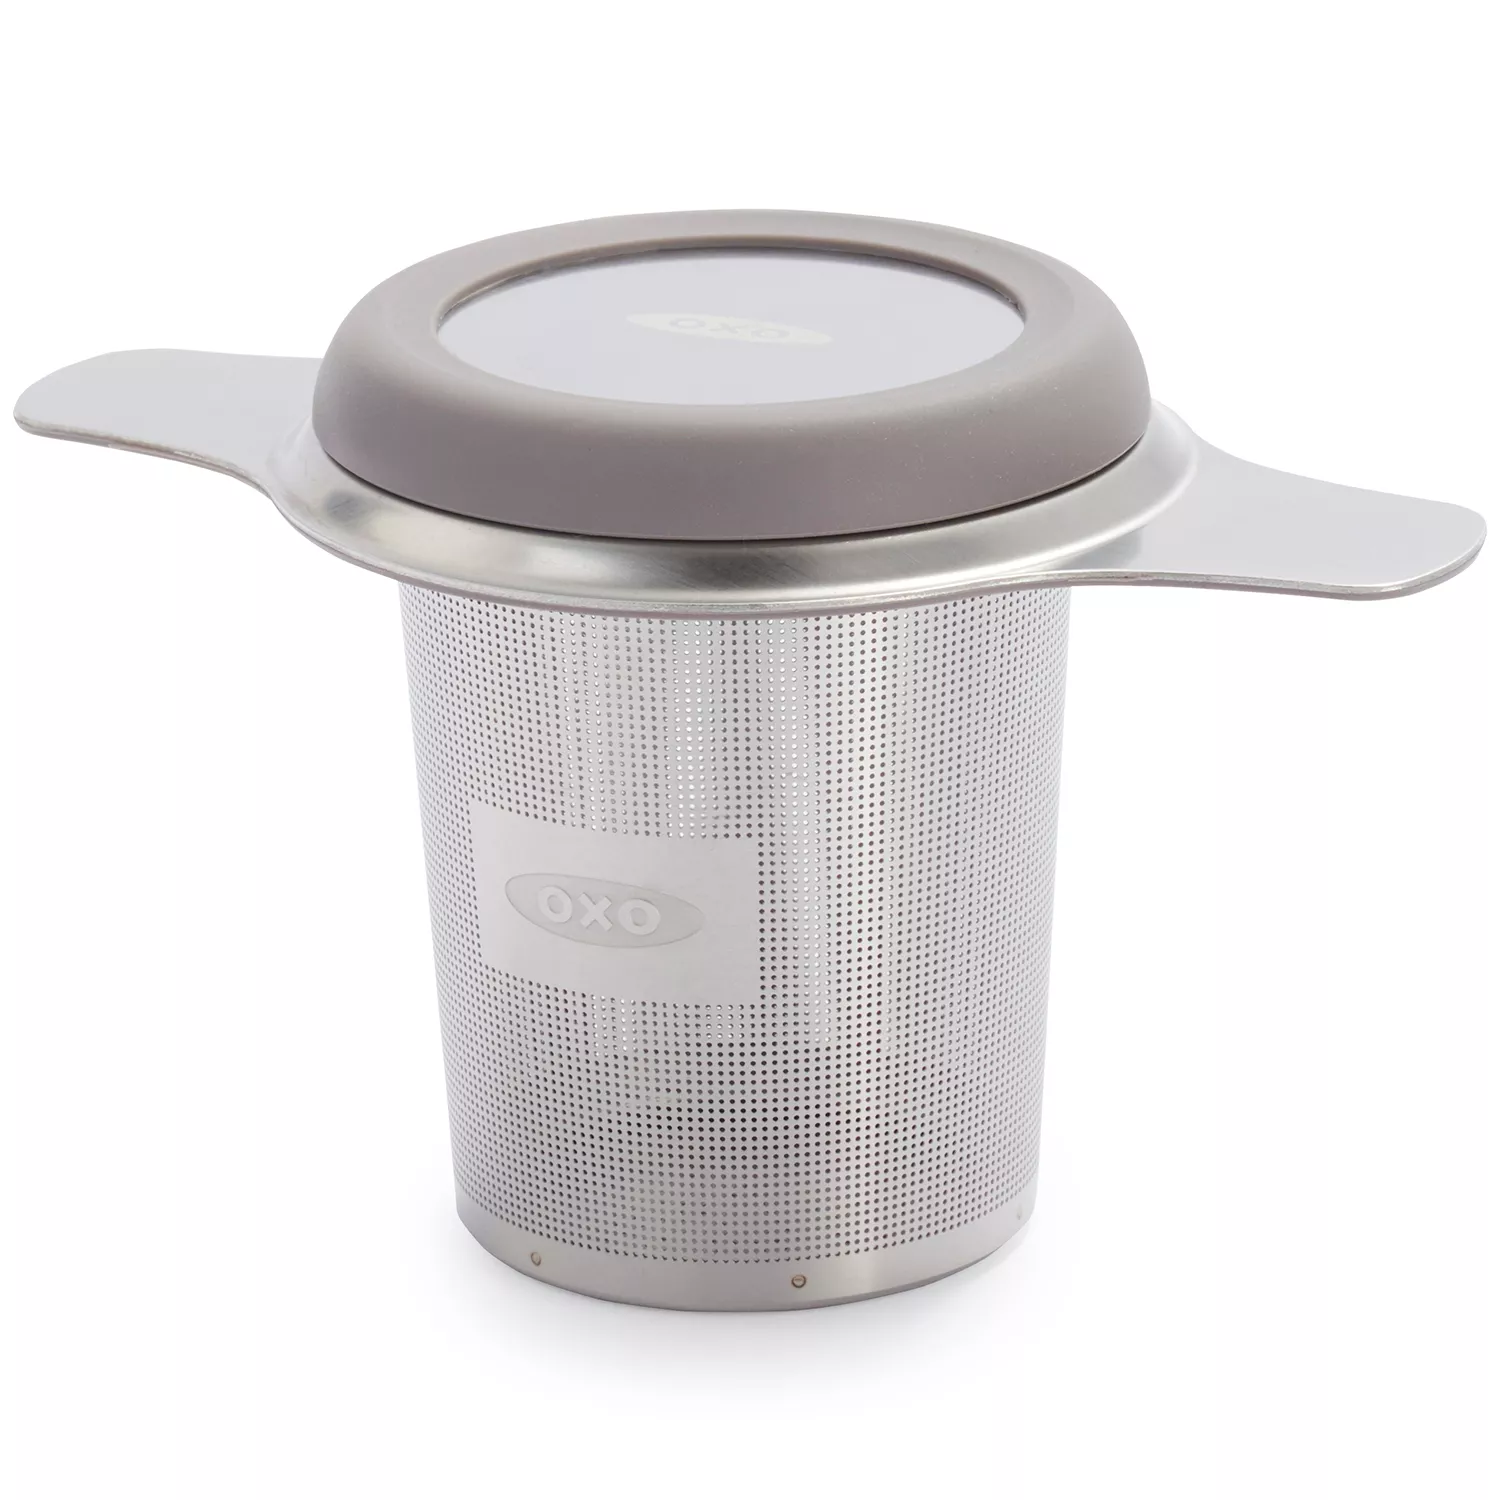 Apace Loose Leaf Tea Infuser (Set of 2) with Tea Scoop and Drip Tray - Ultra Fine Stainless Steel Strainer & Steeper